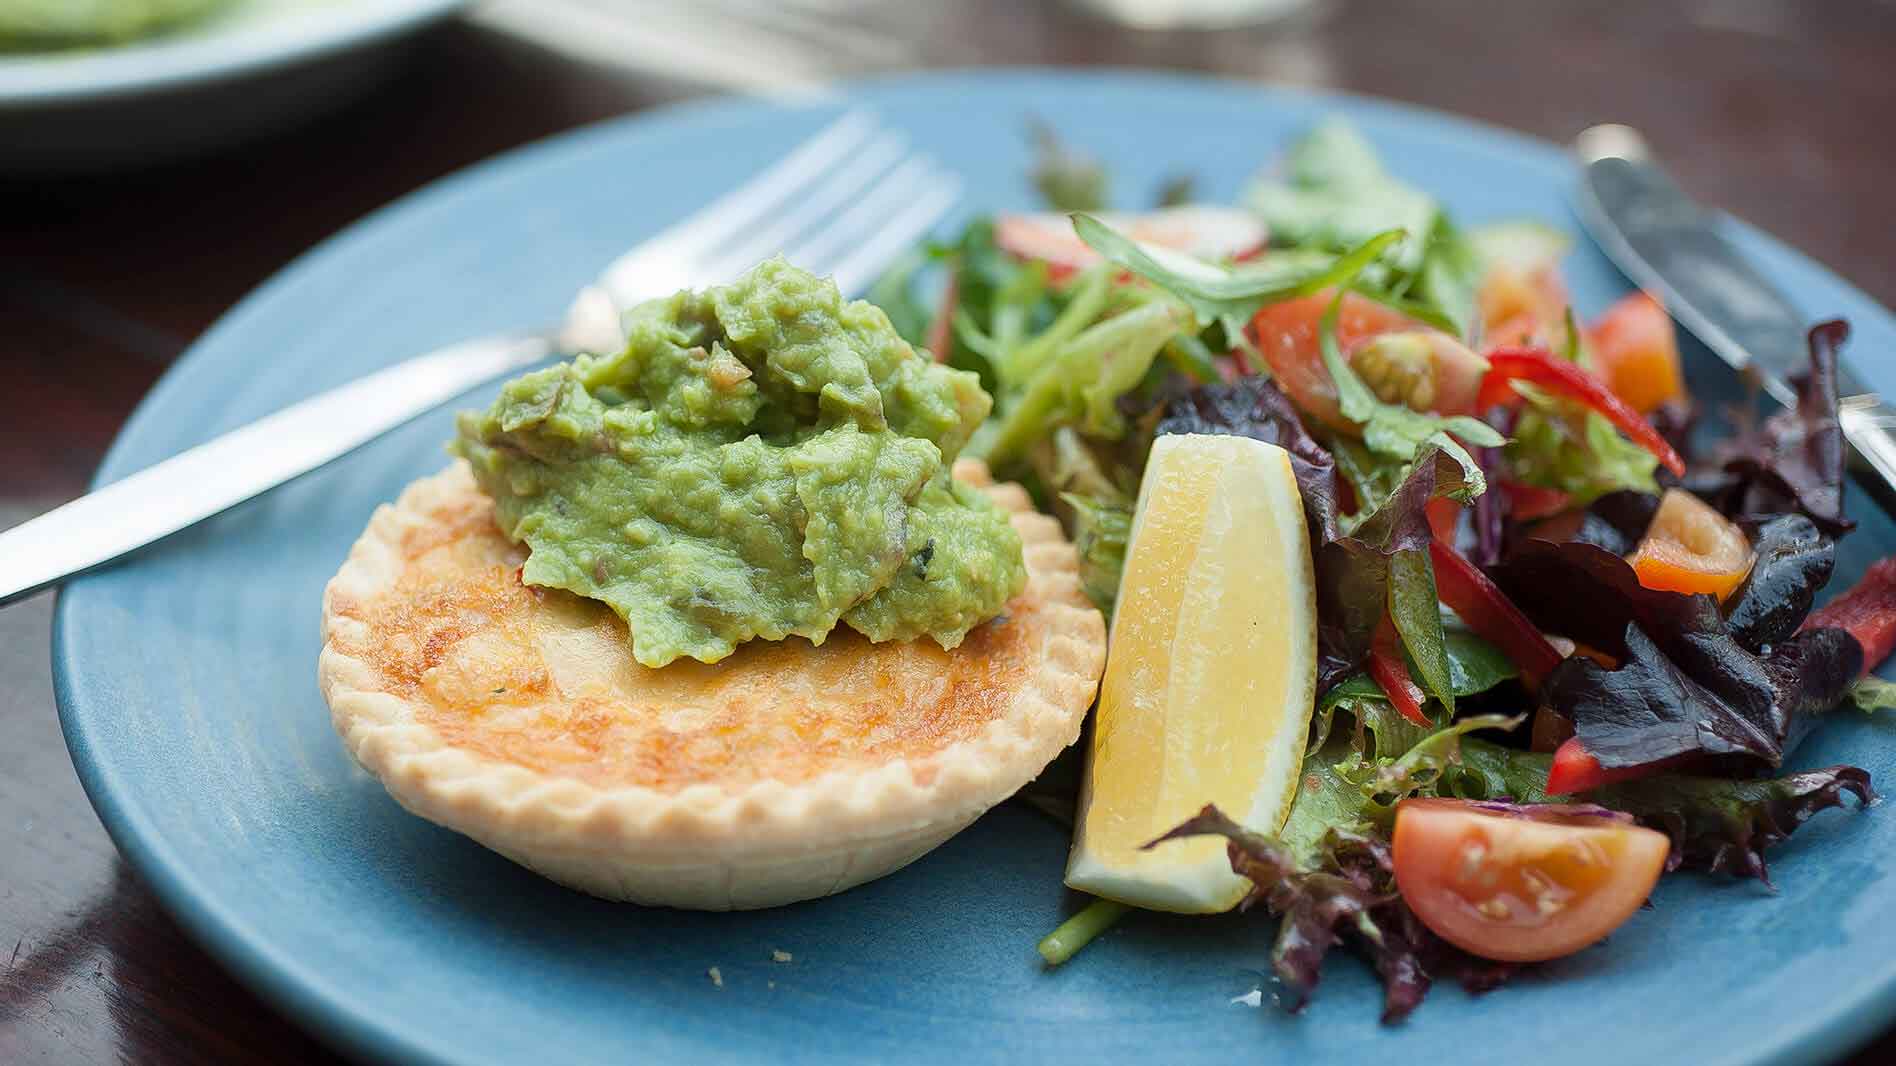 Spiced Mexican Vegetable Quiches served with Fresh Guacamole